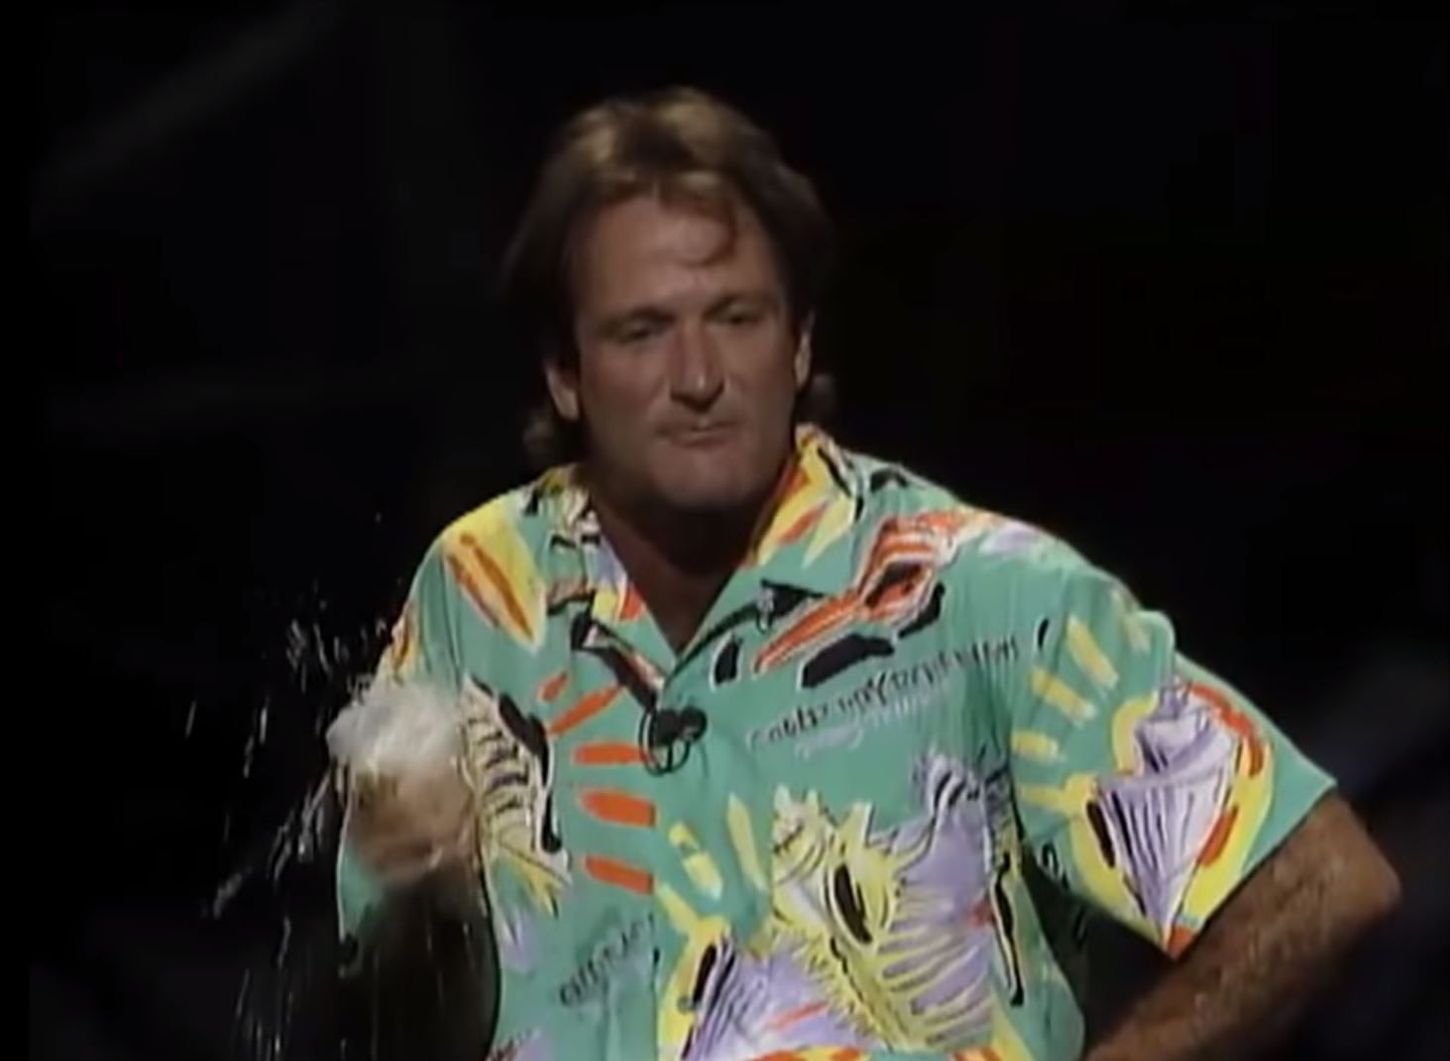 The Robin Williams Documentary Trailer Was Released